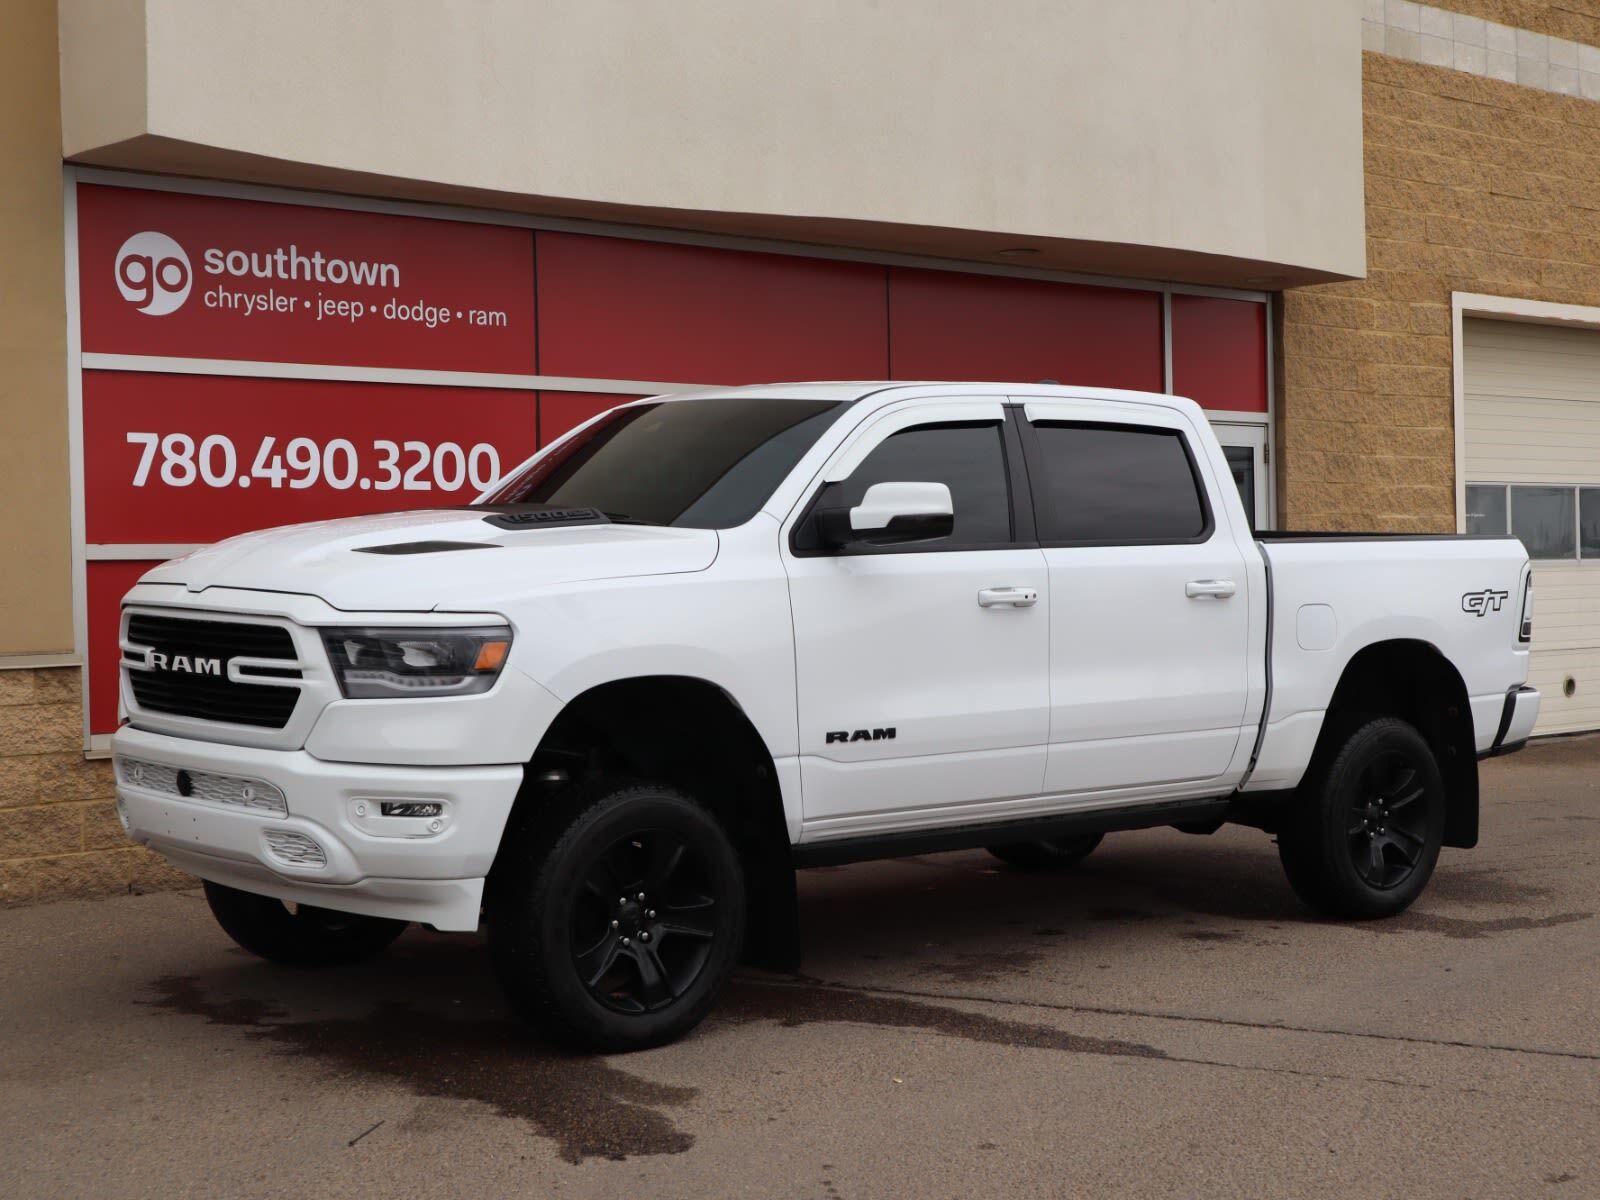 2021 Ram 1500 SPORT IN BRIGHT WHITE EQUIPPED WITH A 5.7L HEMI V8